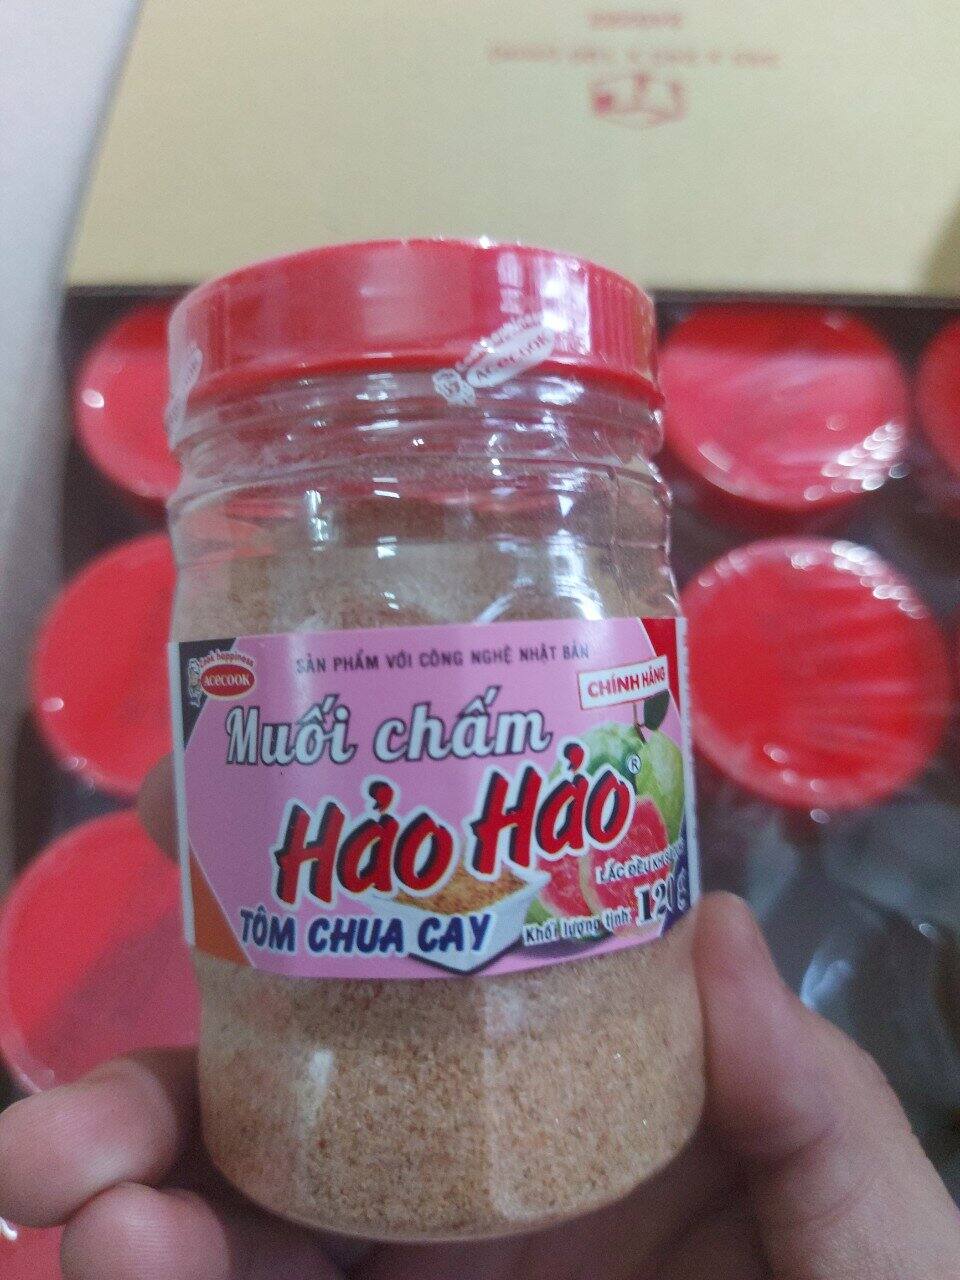 Combo 5 hủ muối chấm chua cay hảo hảo - acecook